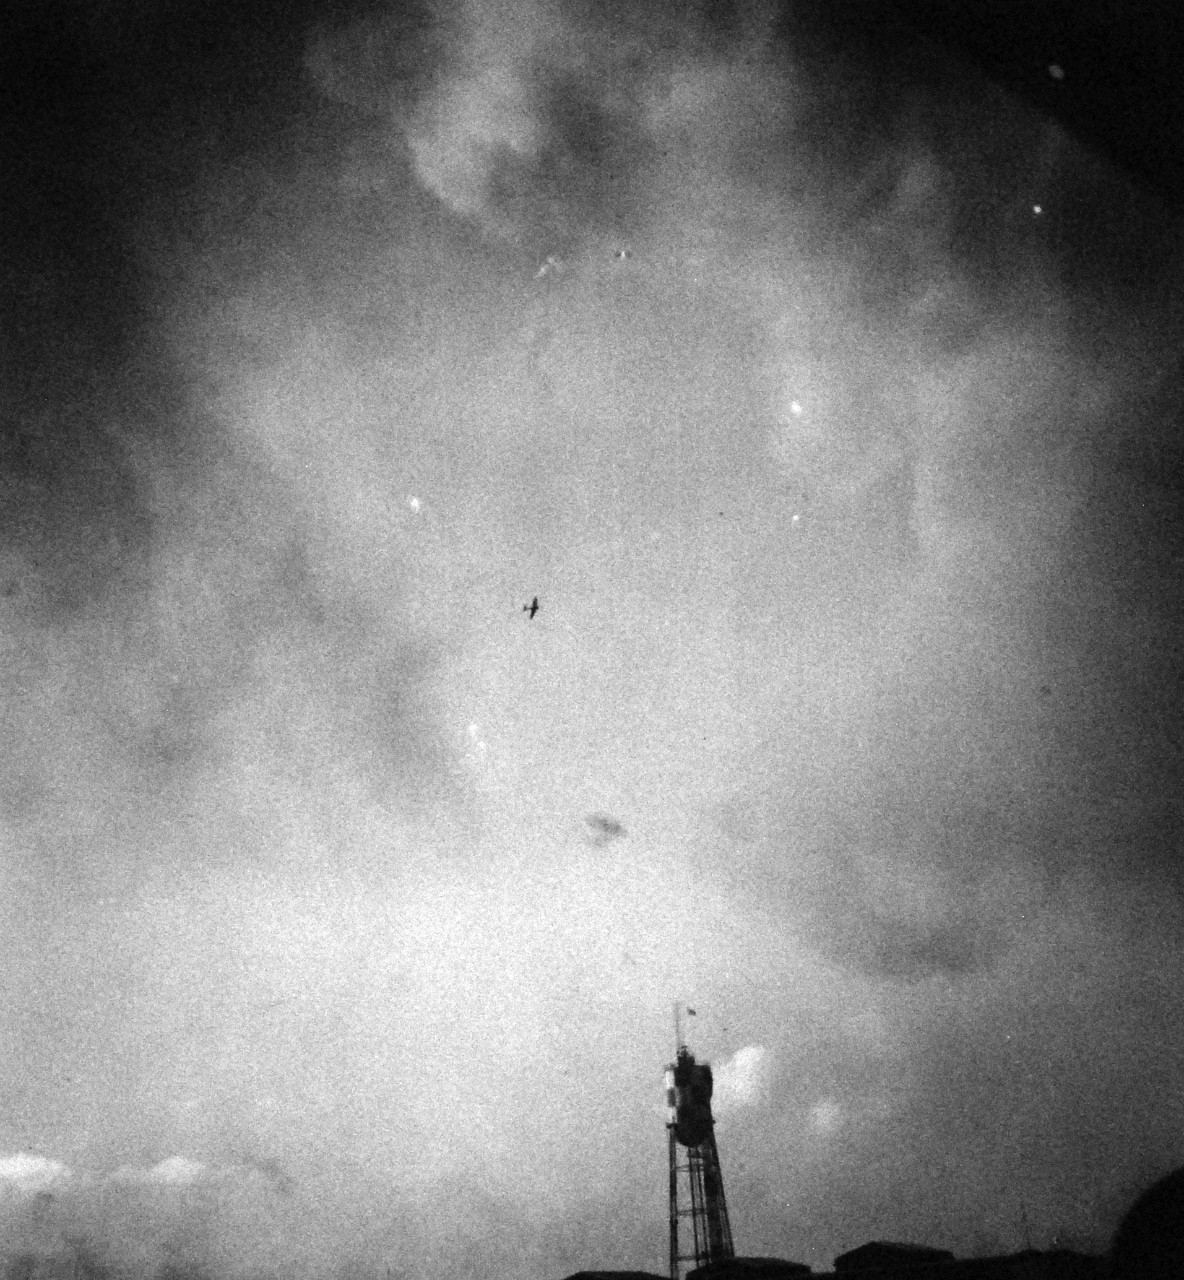 80-G-32436: Pearl Harbor Attack, 7 December 1941.  Japanese Navy Type 99 Carrier Bomber ("Val")  during the attack.  Official U.S. Navy photograph, now in the collections of the National Archives.  (9/15/15).